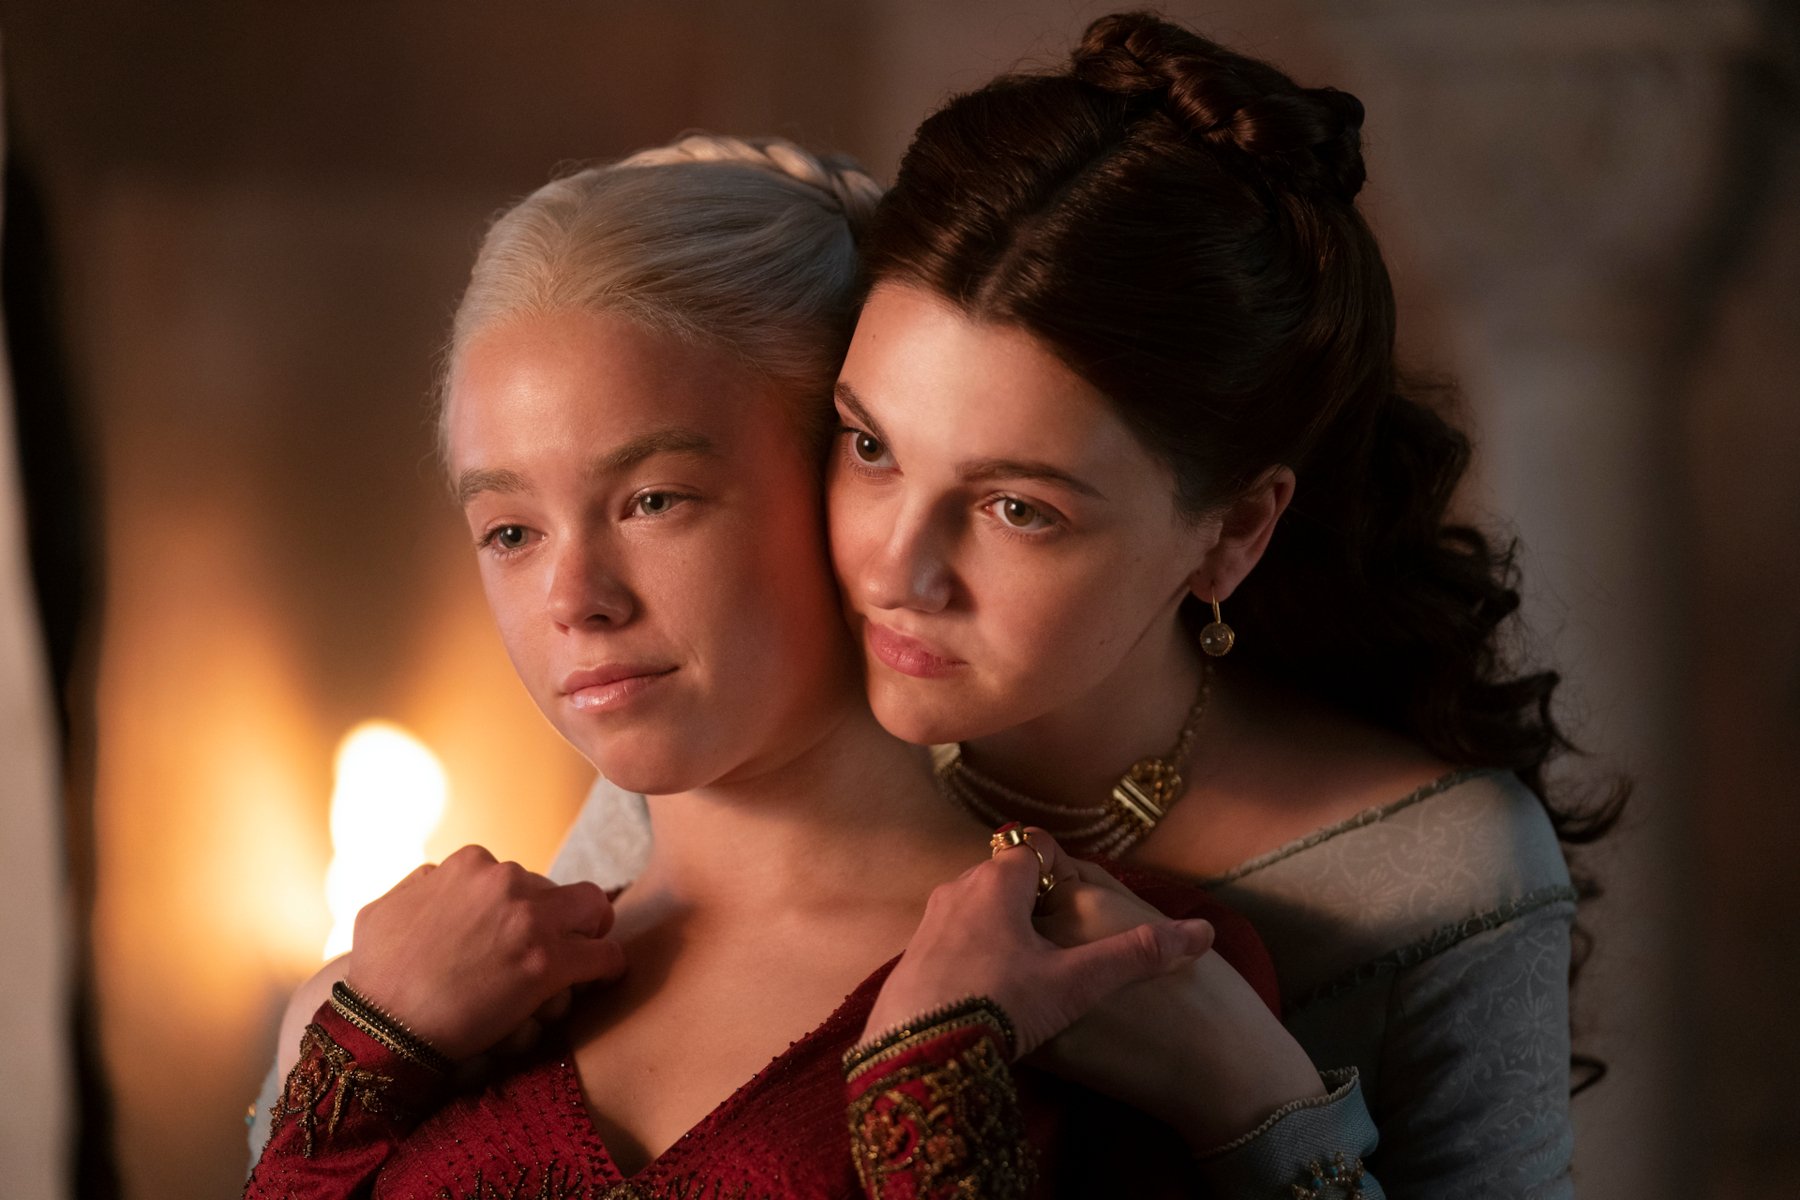 Milly Alcock and Emily Carey as Rhaenyra Targaryen and Alicent Hightower in an episode of 'House of the Dragon' Season 1. Alicent is standing behind Rhaenyra and their faces are touching.